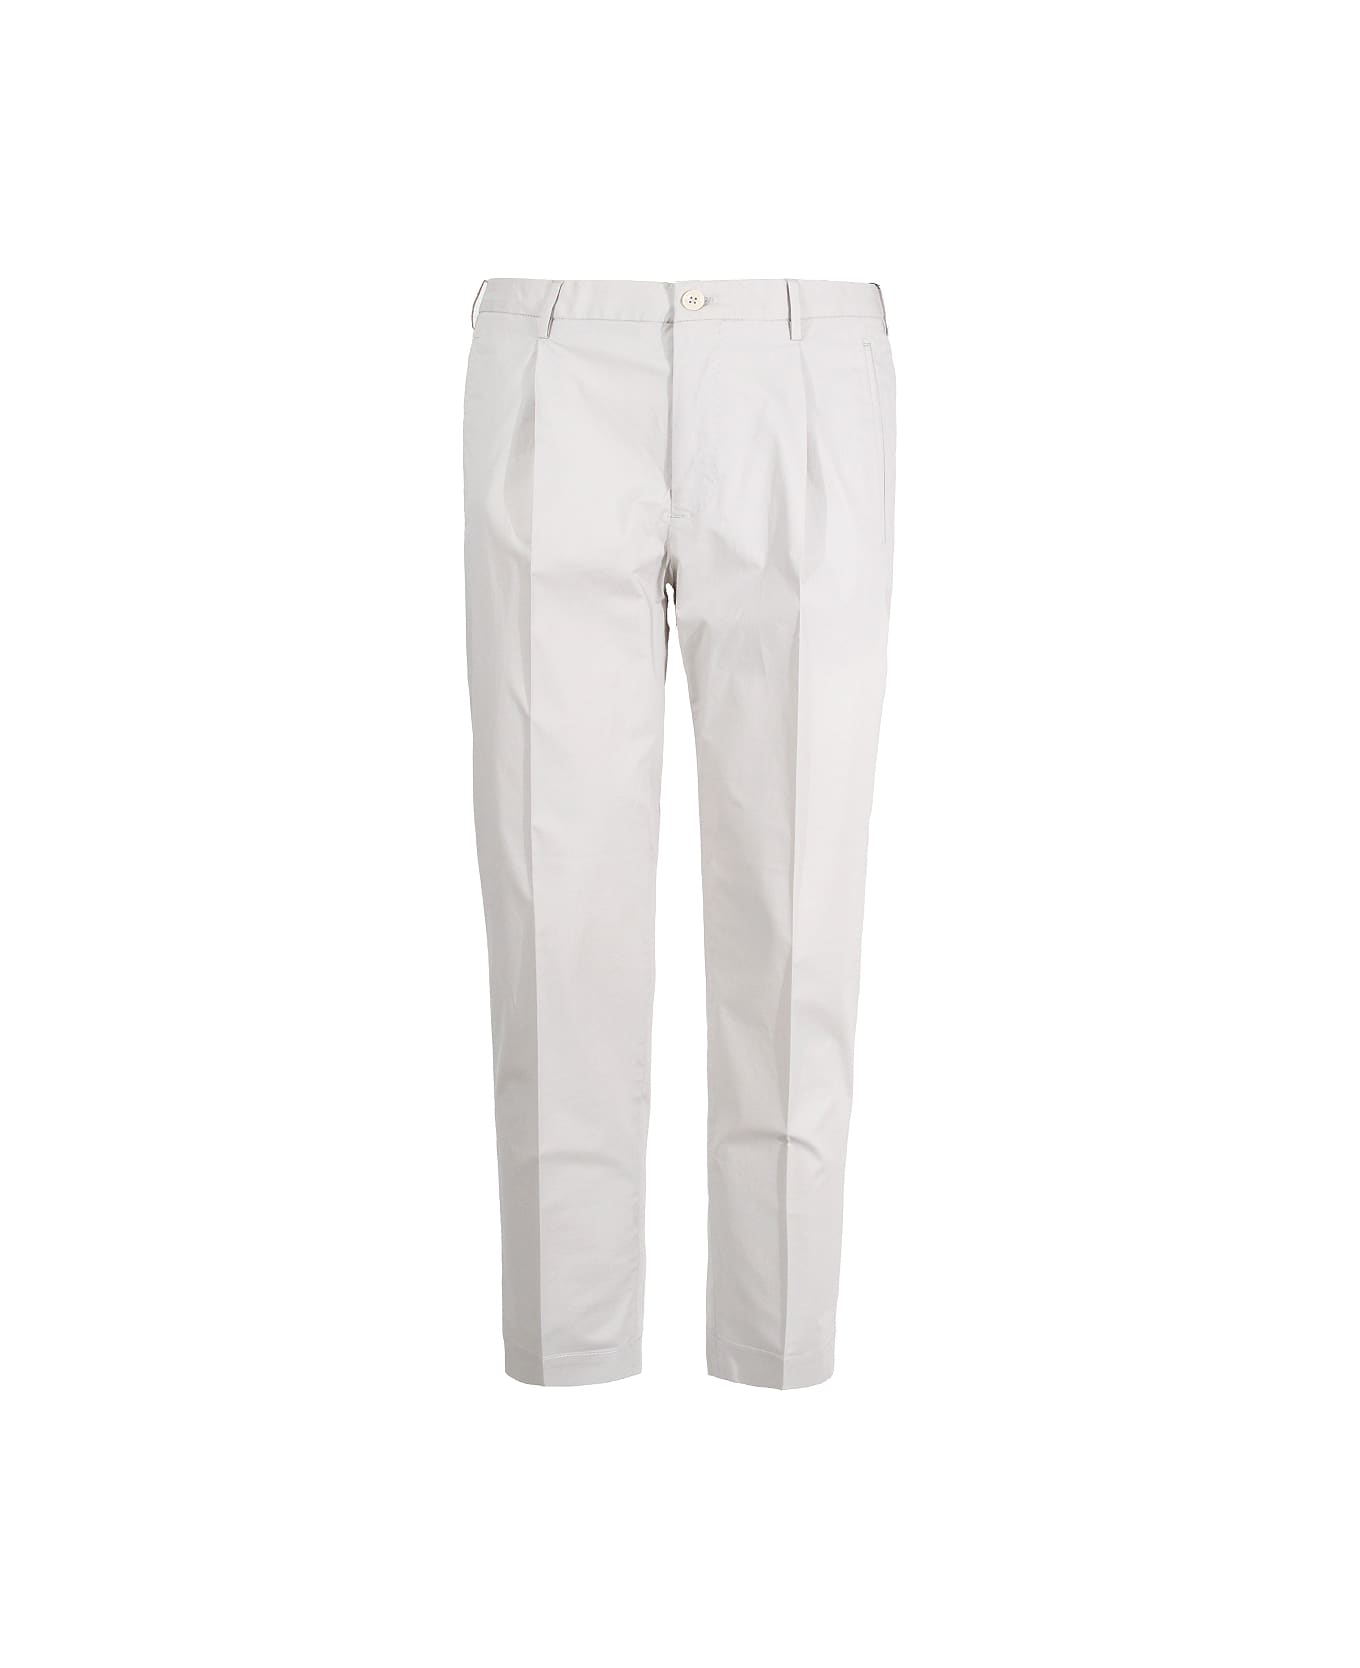 Incotex Trousers With Pleats - Light Grey ボトムス